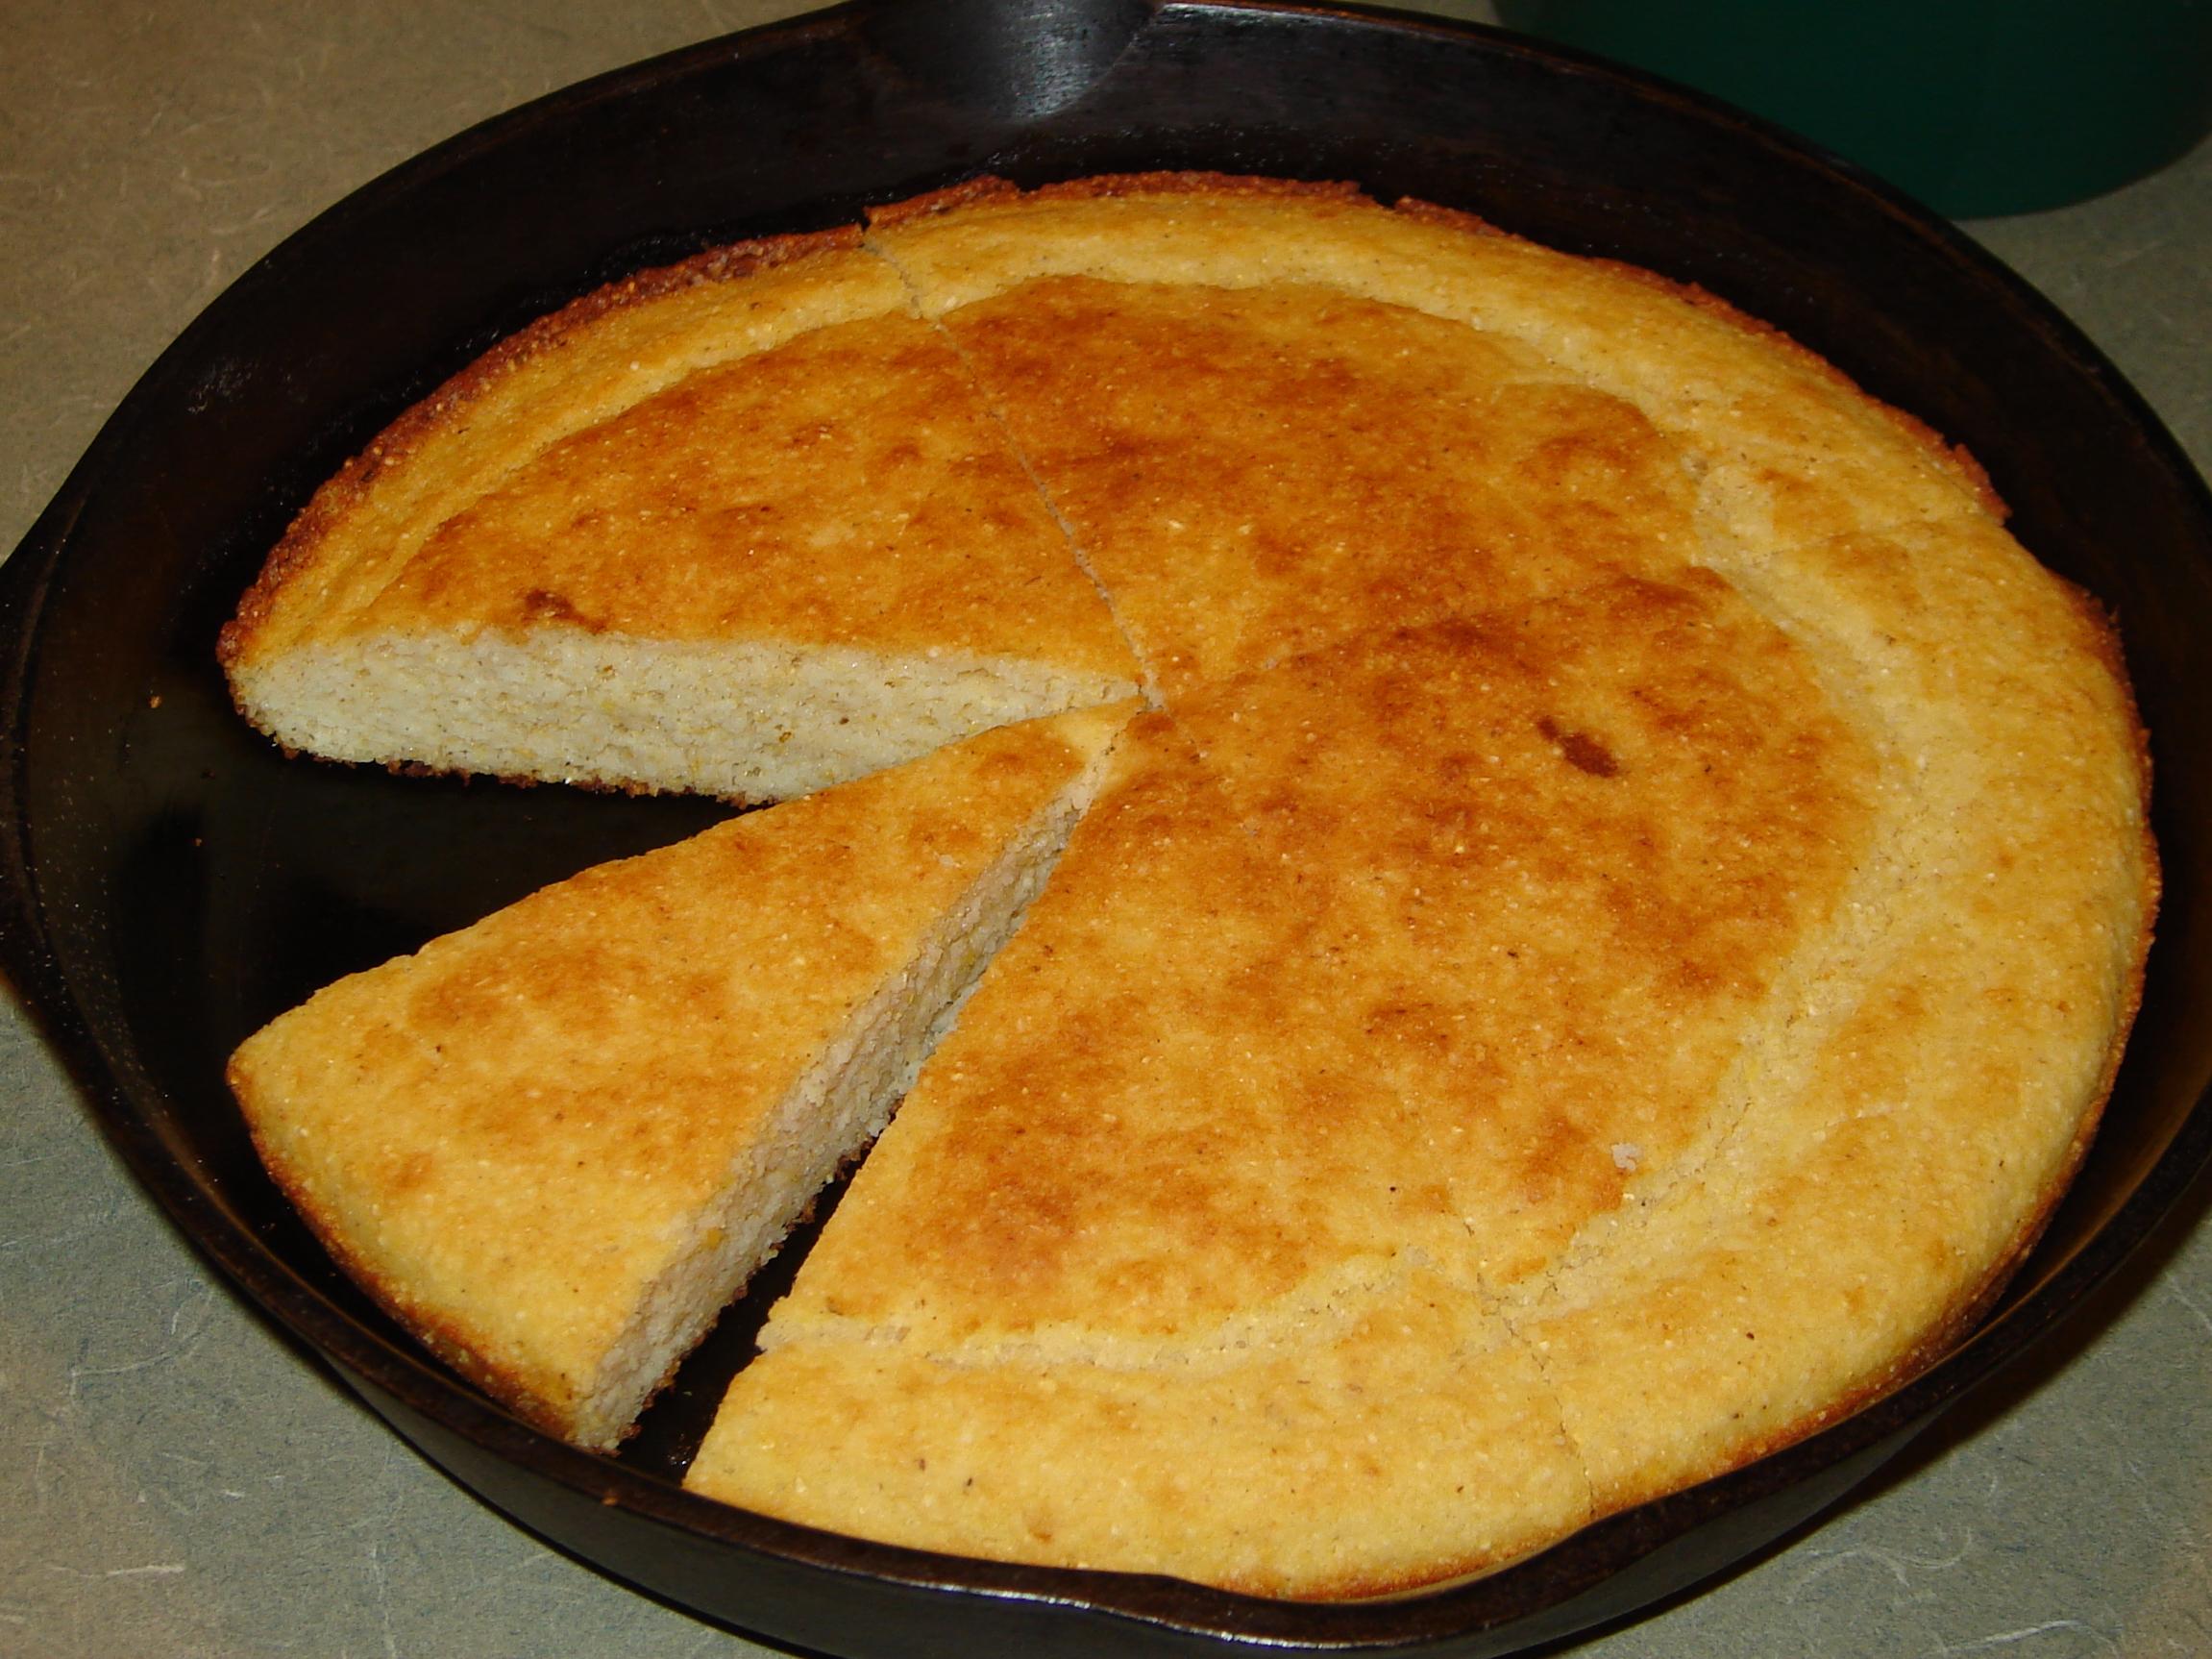  A tantalizing aroma wafts from the freshly baked Southern Buttermilk Cornbread.